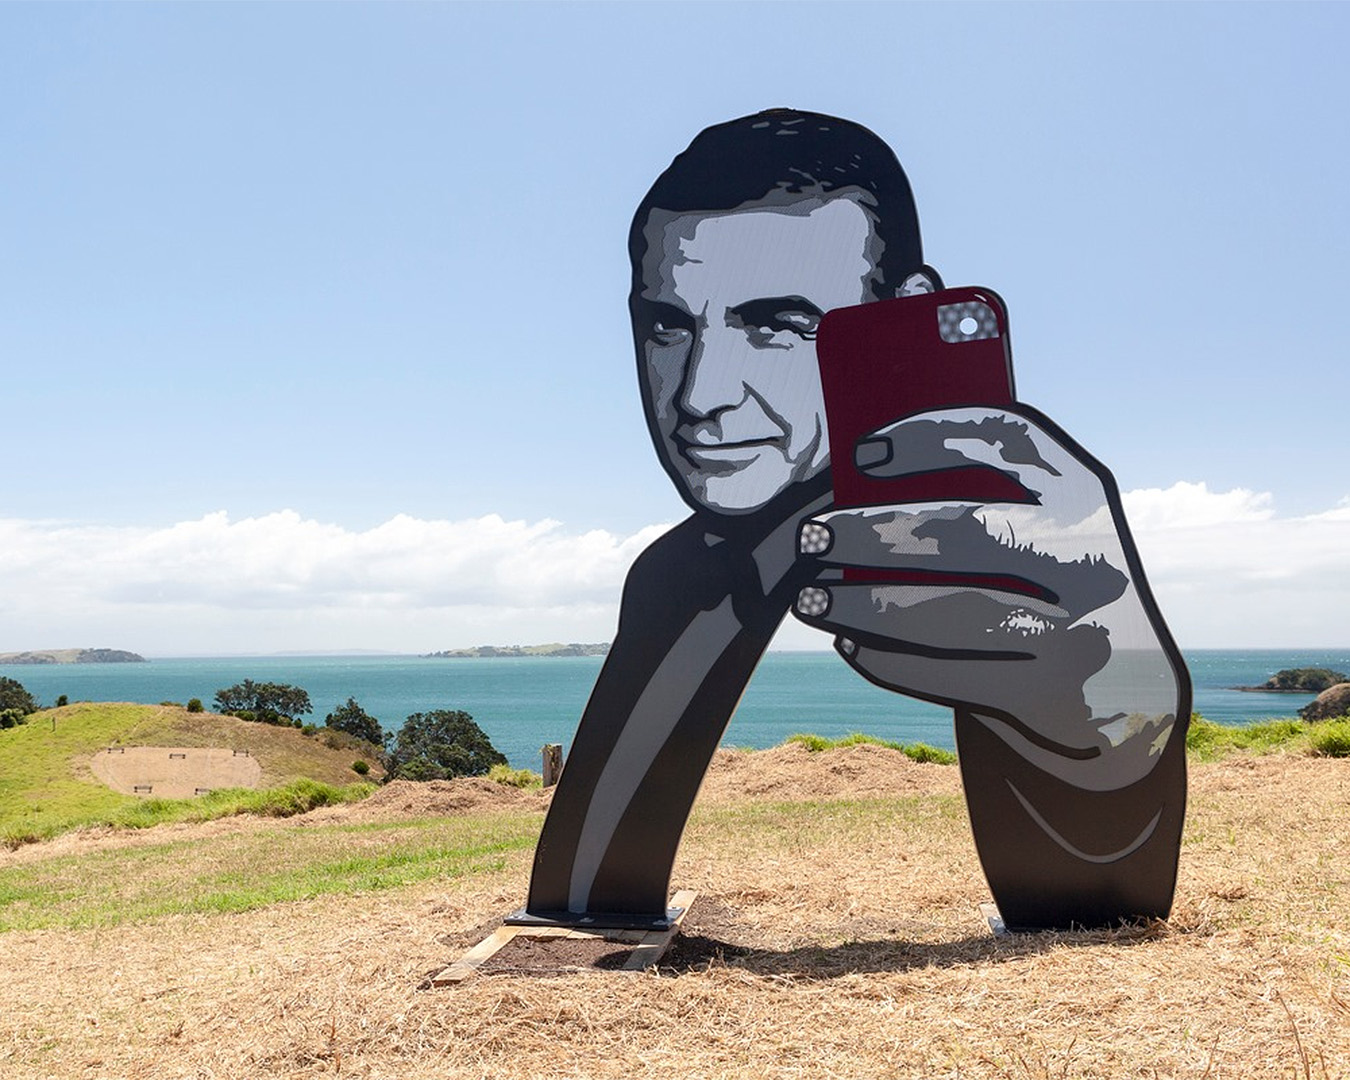 Sculpture on the gulf shows Roger Moore taking a selfie.